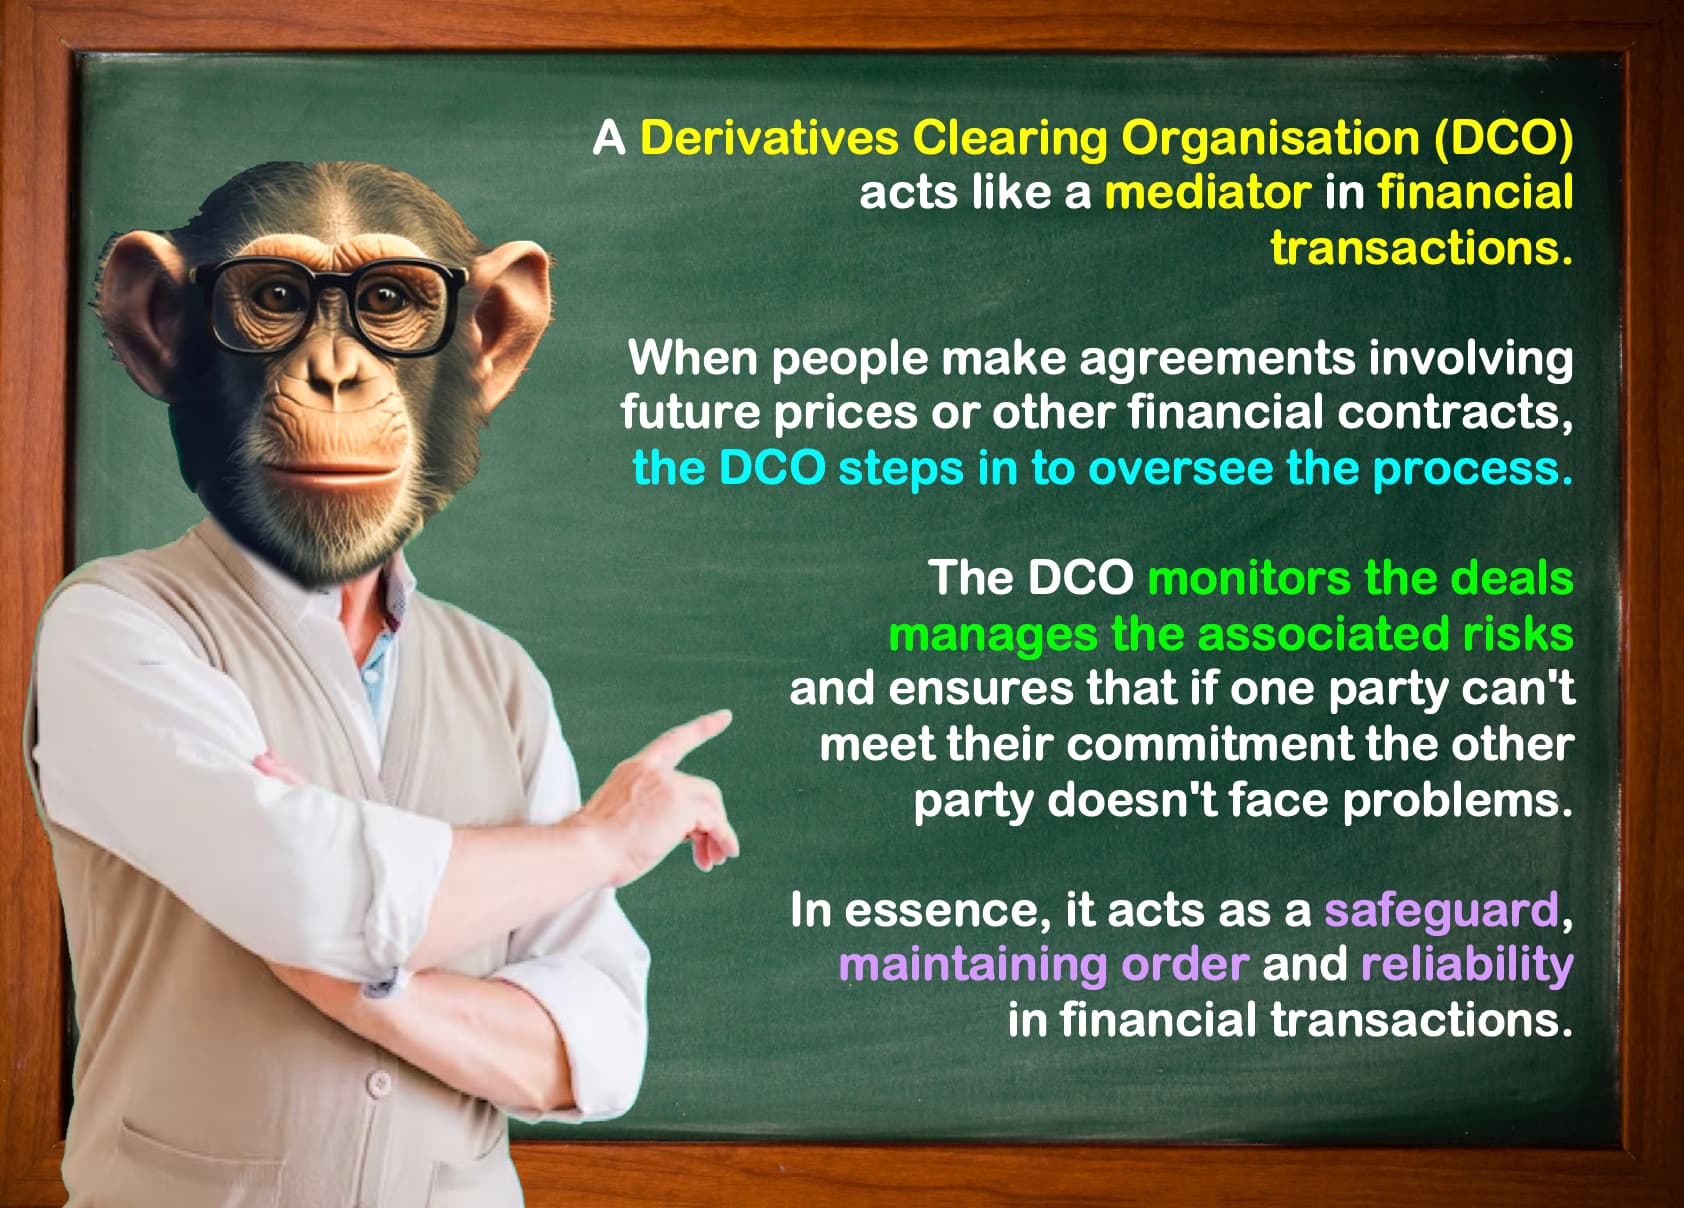 IMAGE EXPLAINING THE DCO OPERATIONING AS A FINANCIAL MEDIATOR 